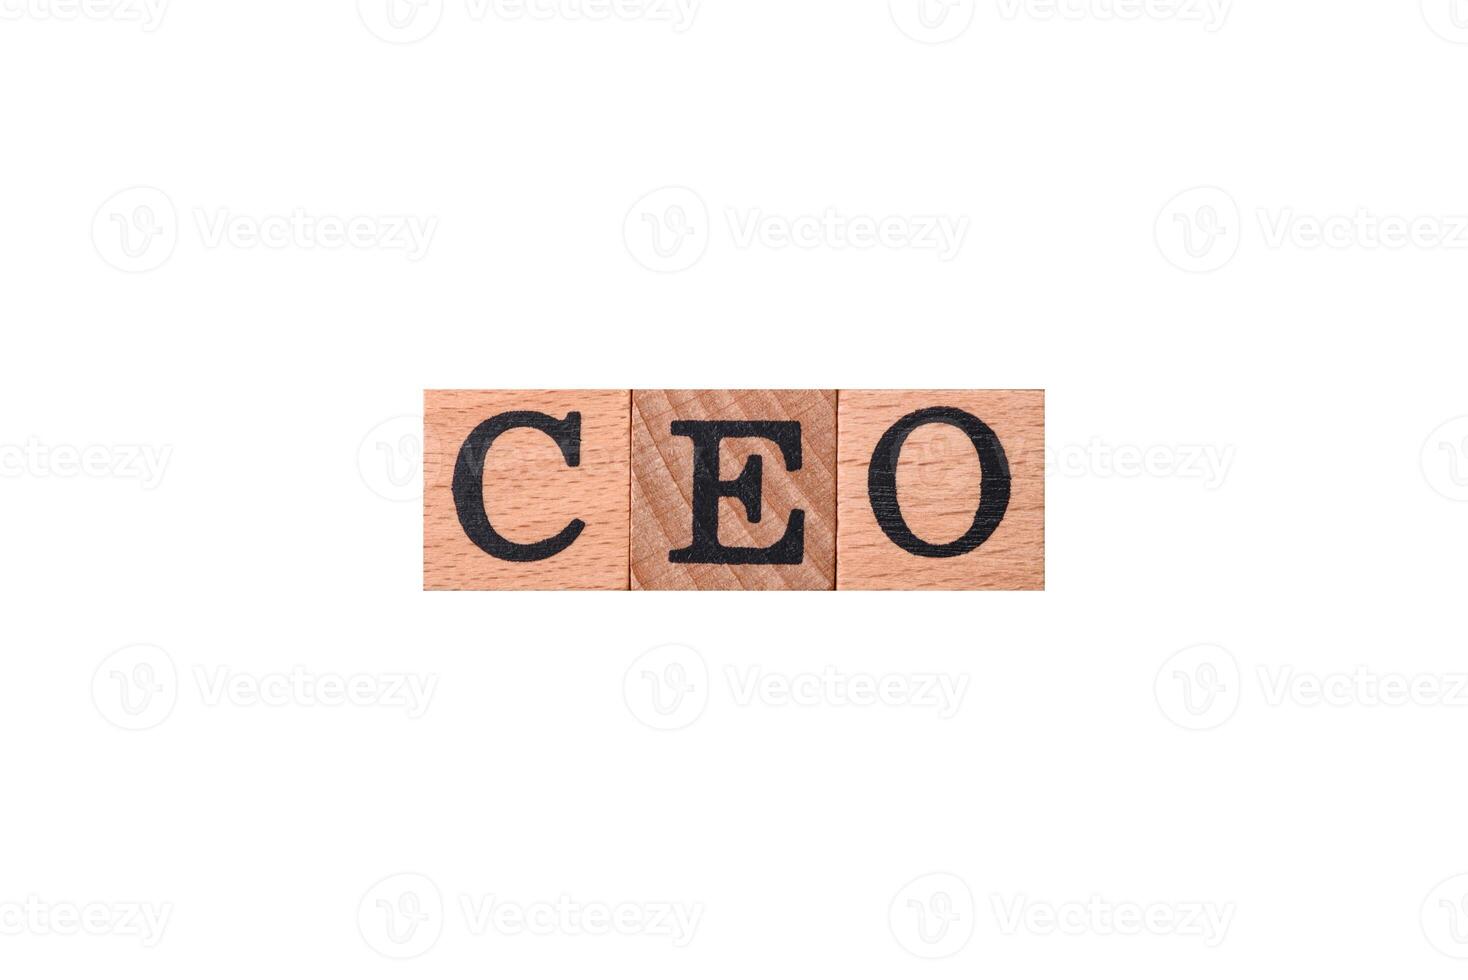 The inscription ceo in wooden cubes on a dark concrete background photo